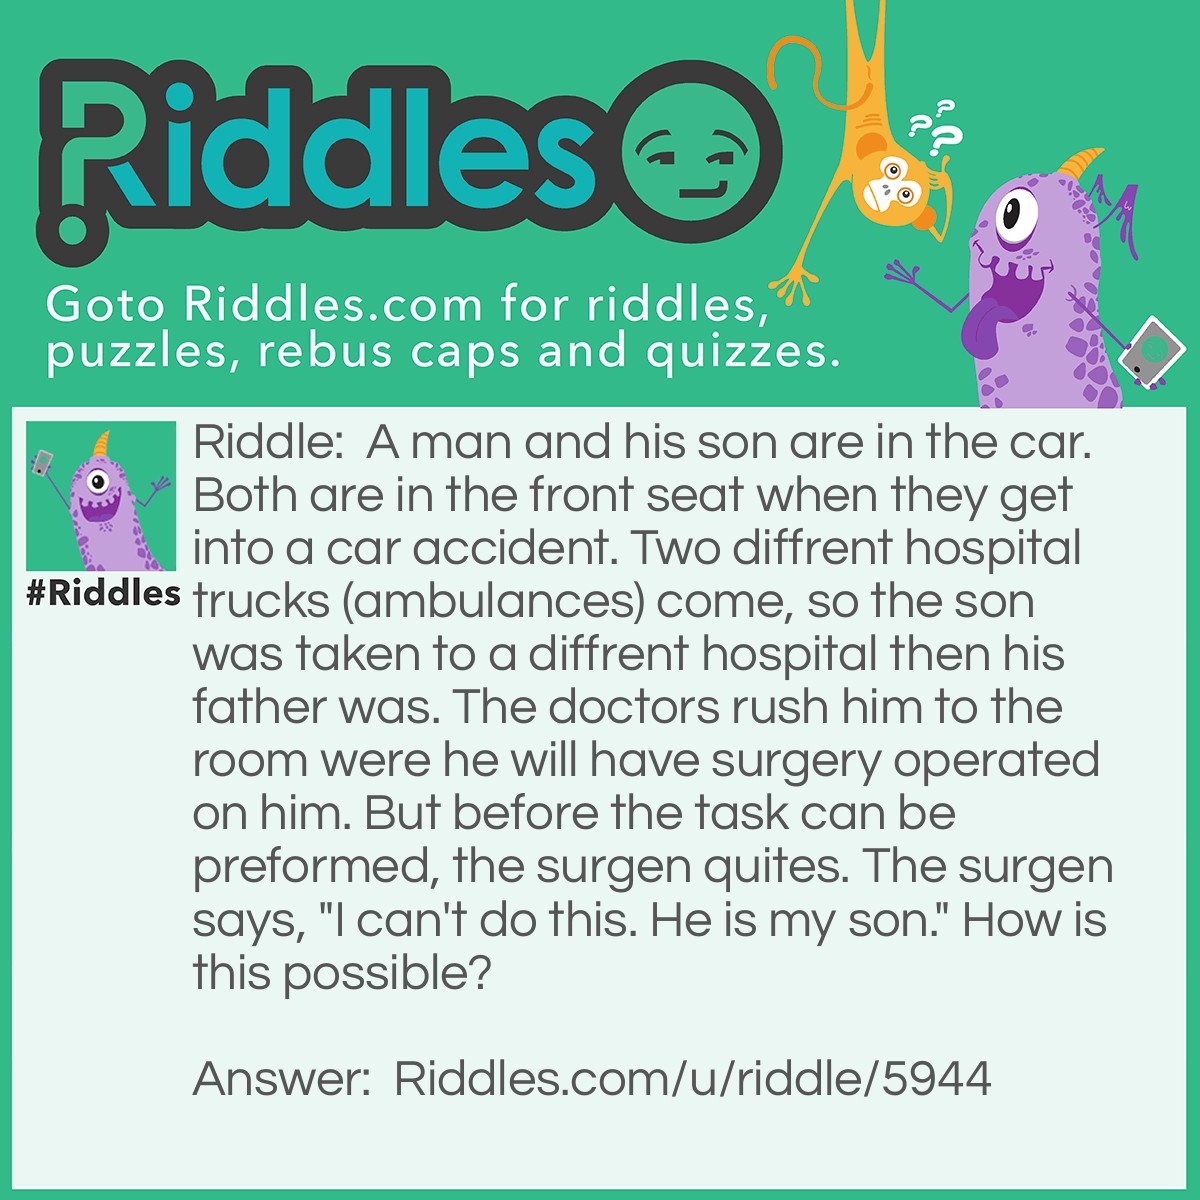 Riddle: A man and his son are in the car. Both are in the front seat when they get into a car accident. Two different hospital trucks (ambulances) come, so the son was taken to a different hospital than his father was. The doctors rushed him to the room where he will have surgery operated on him. But before the task can be performed, the surgeon quotes. The surgeon says, "I can't do this. He is my son." How is this possible? Answer: The surgen was his mother.